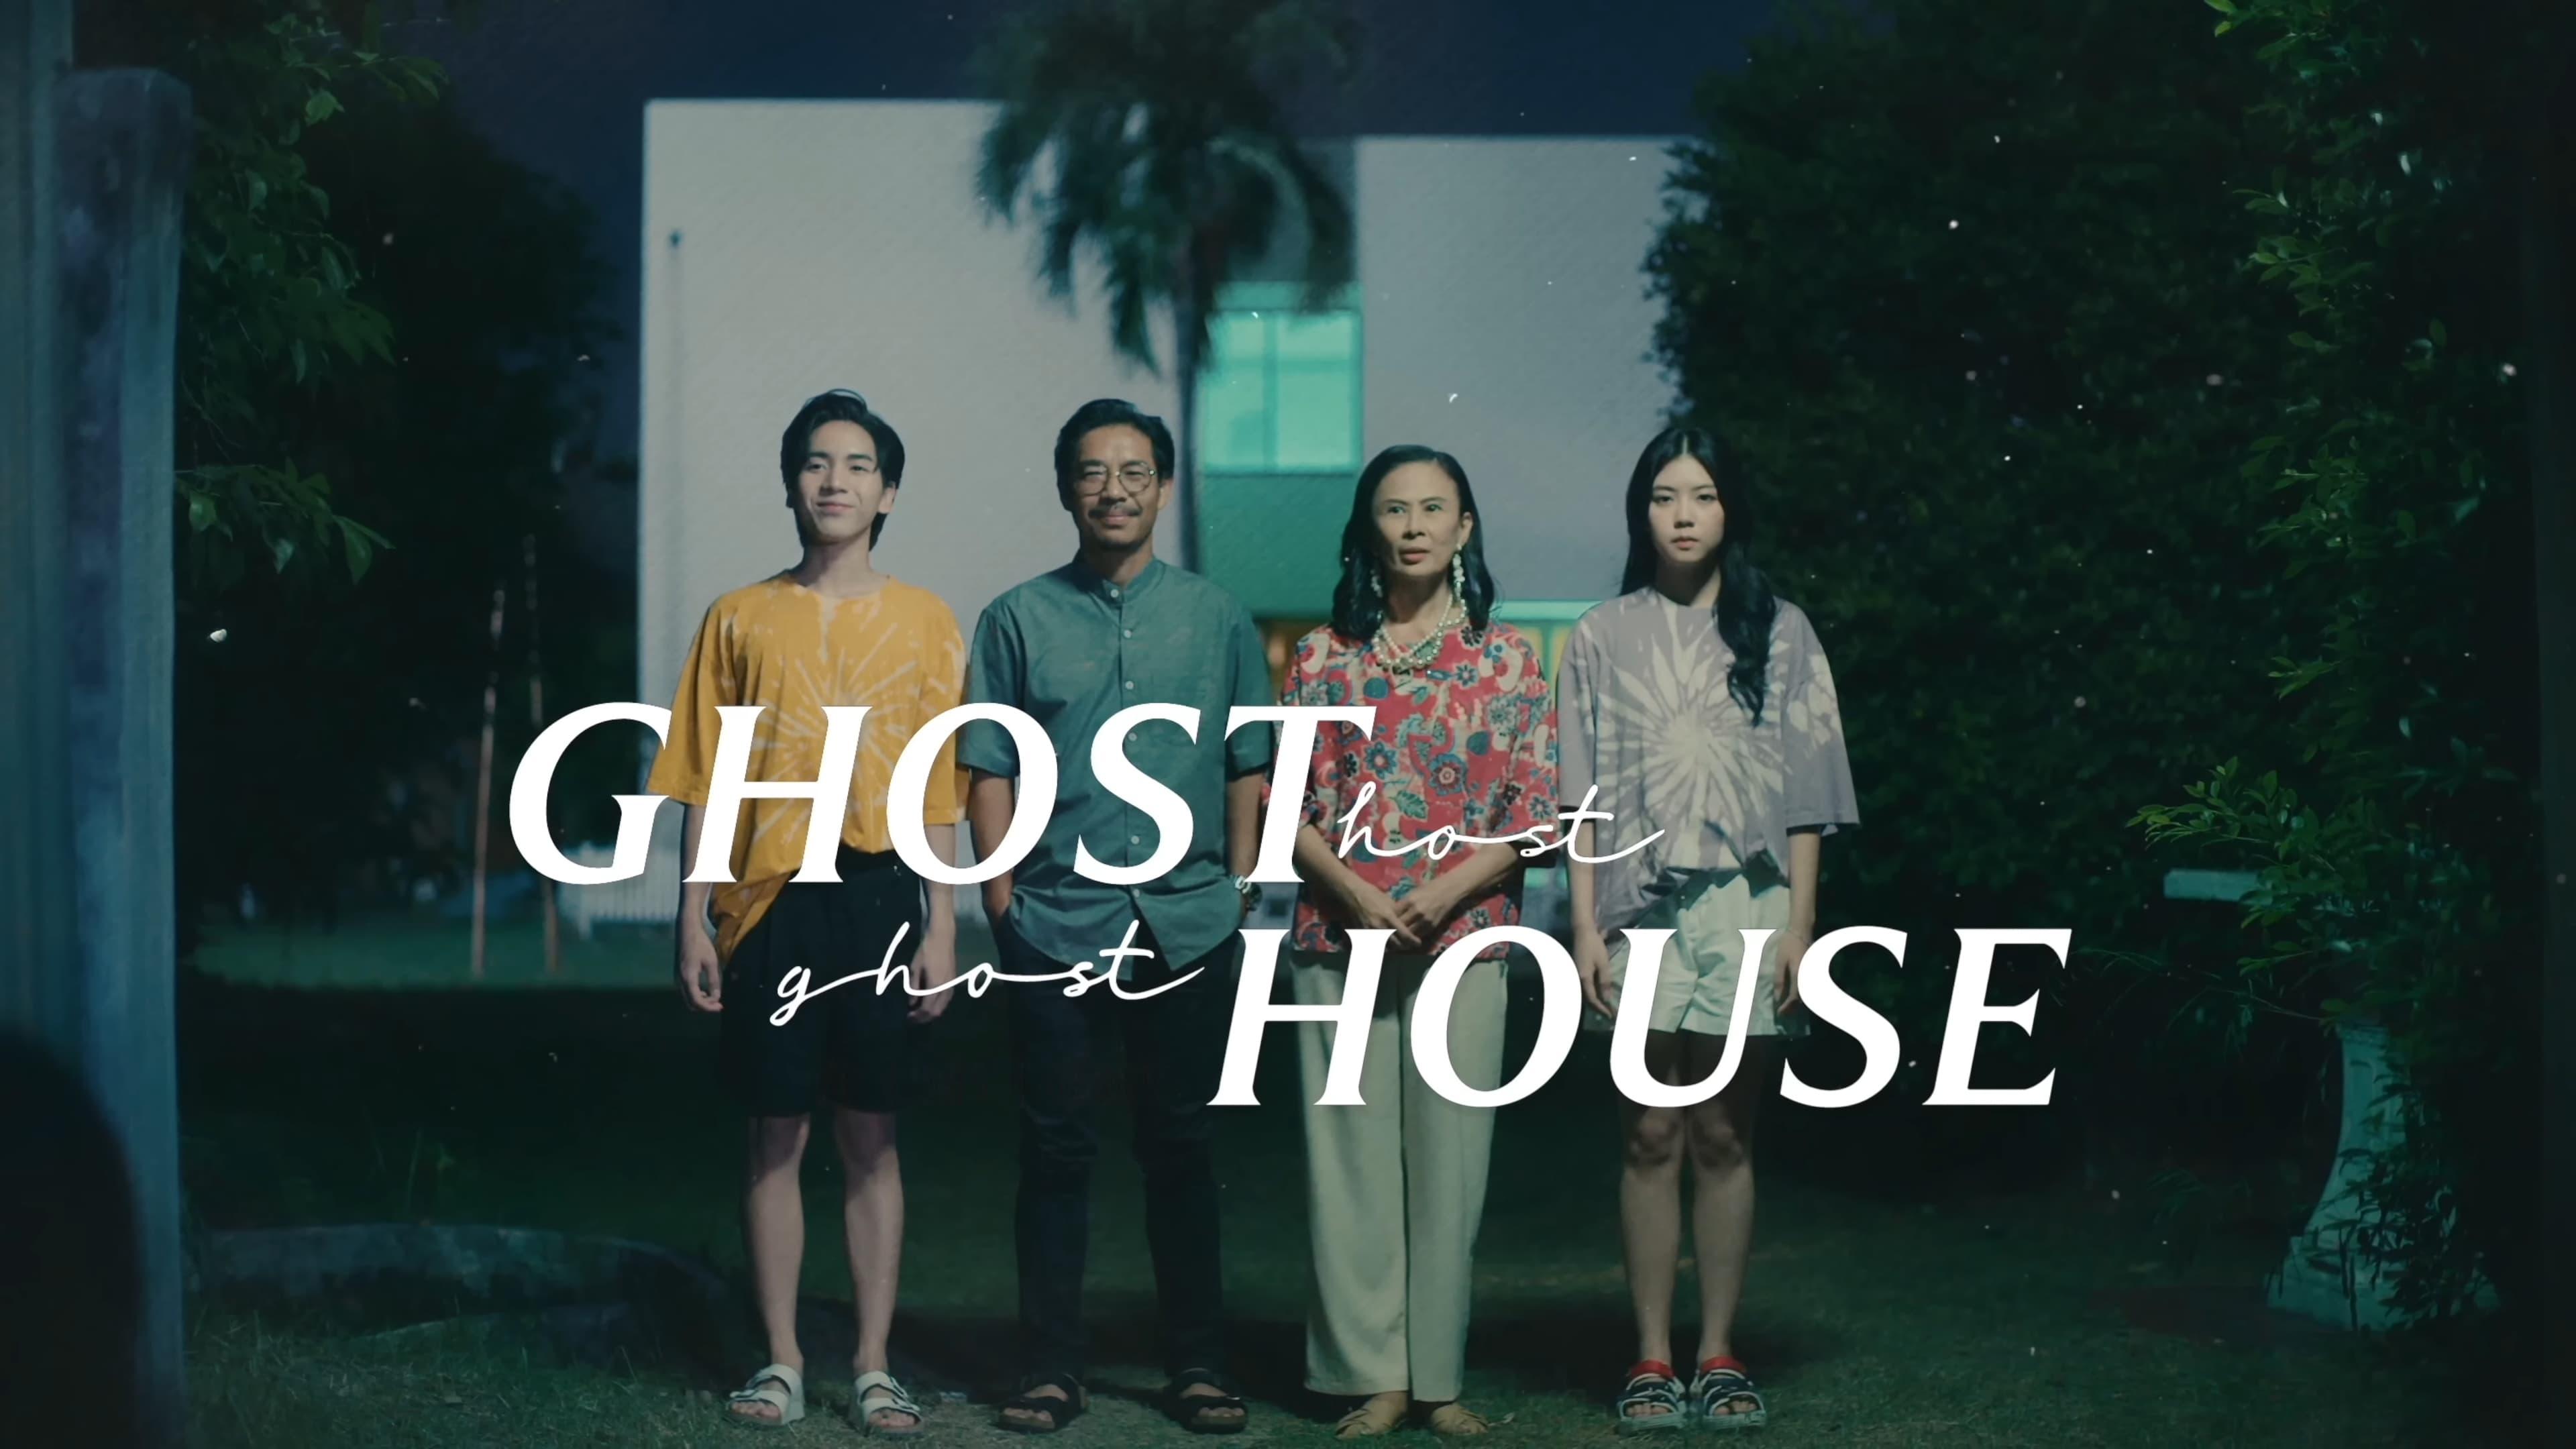 Ghost Host, Ghost House backdrop